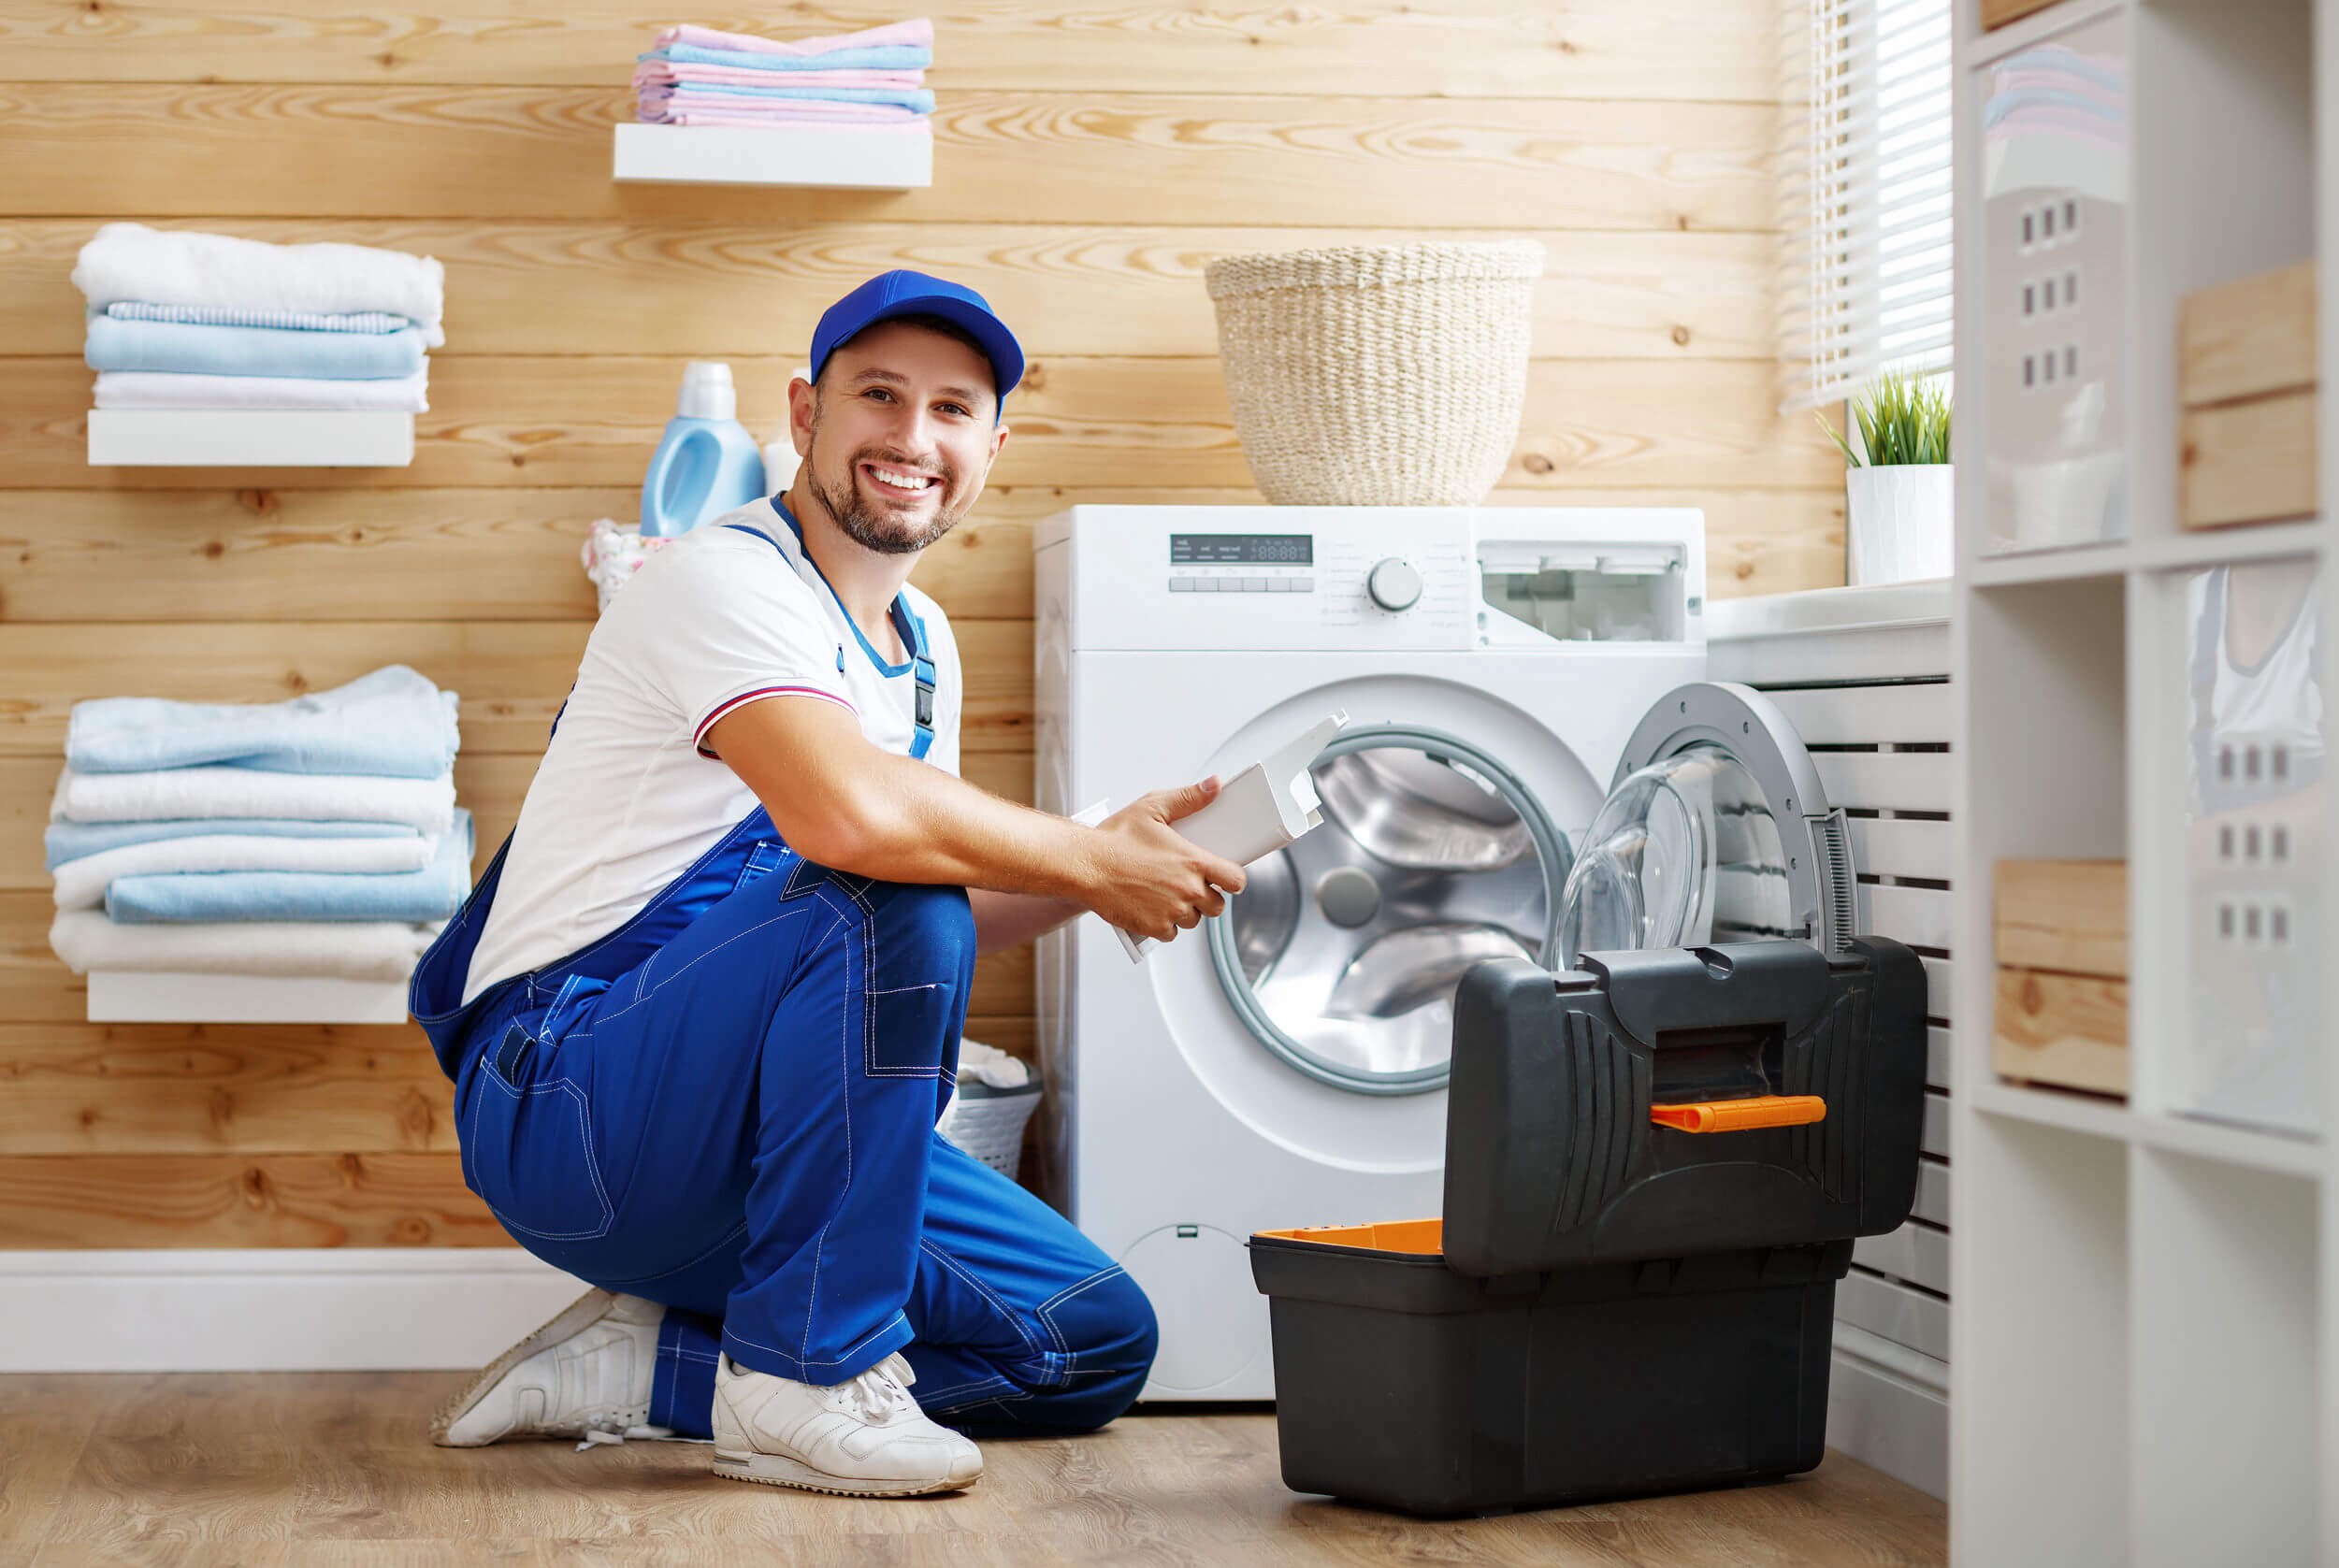 Who Fixes Major Home Appliances Dependable Refrigeration & Appliance Repair Service